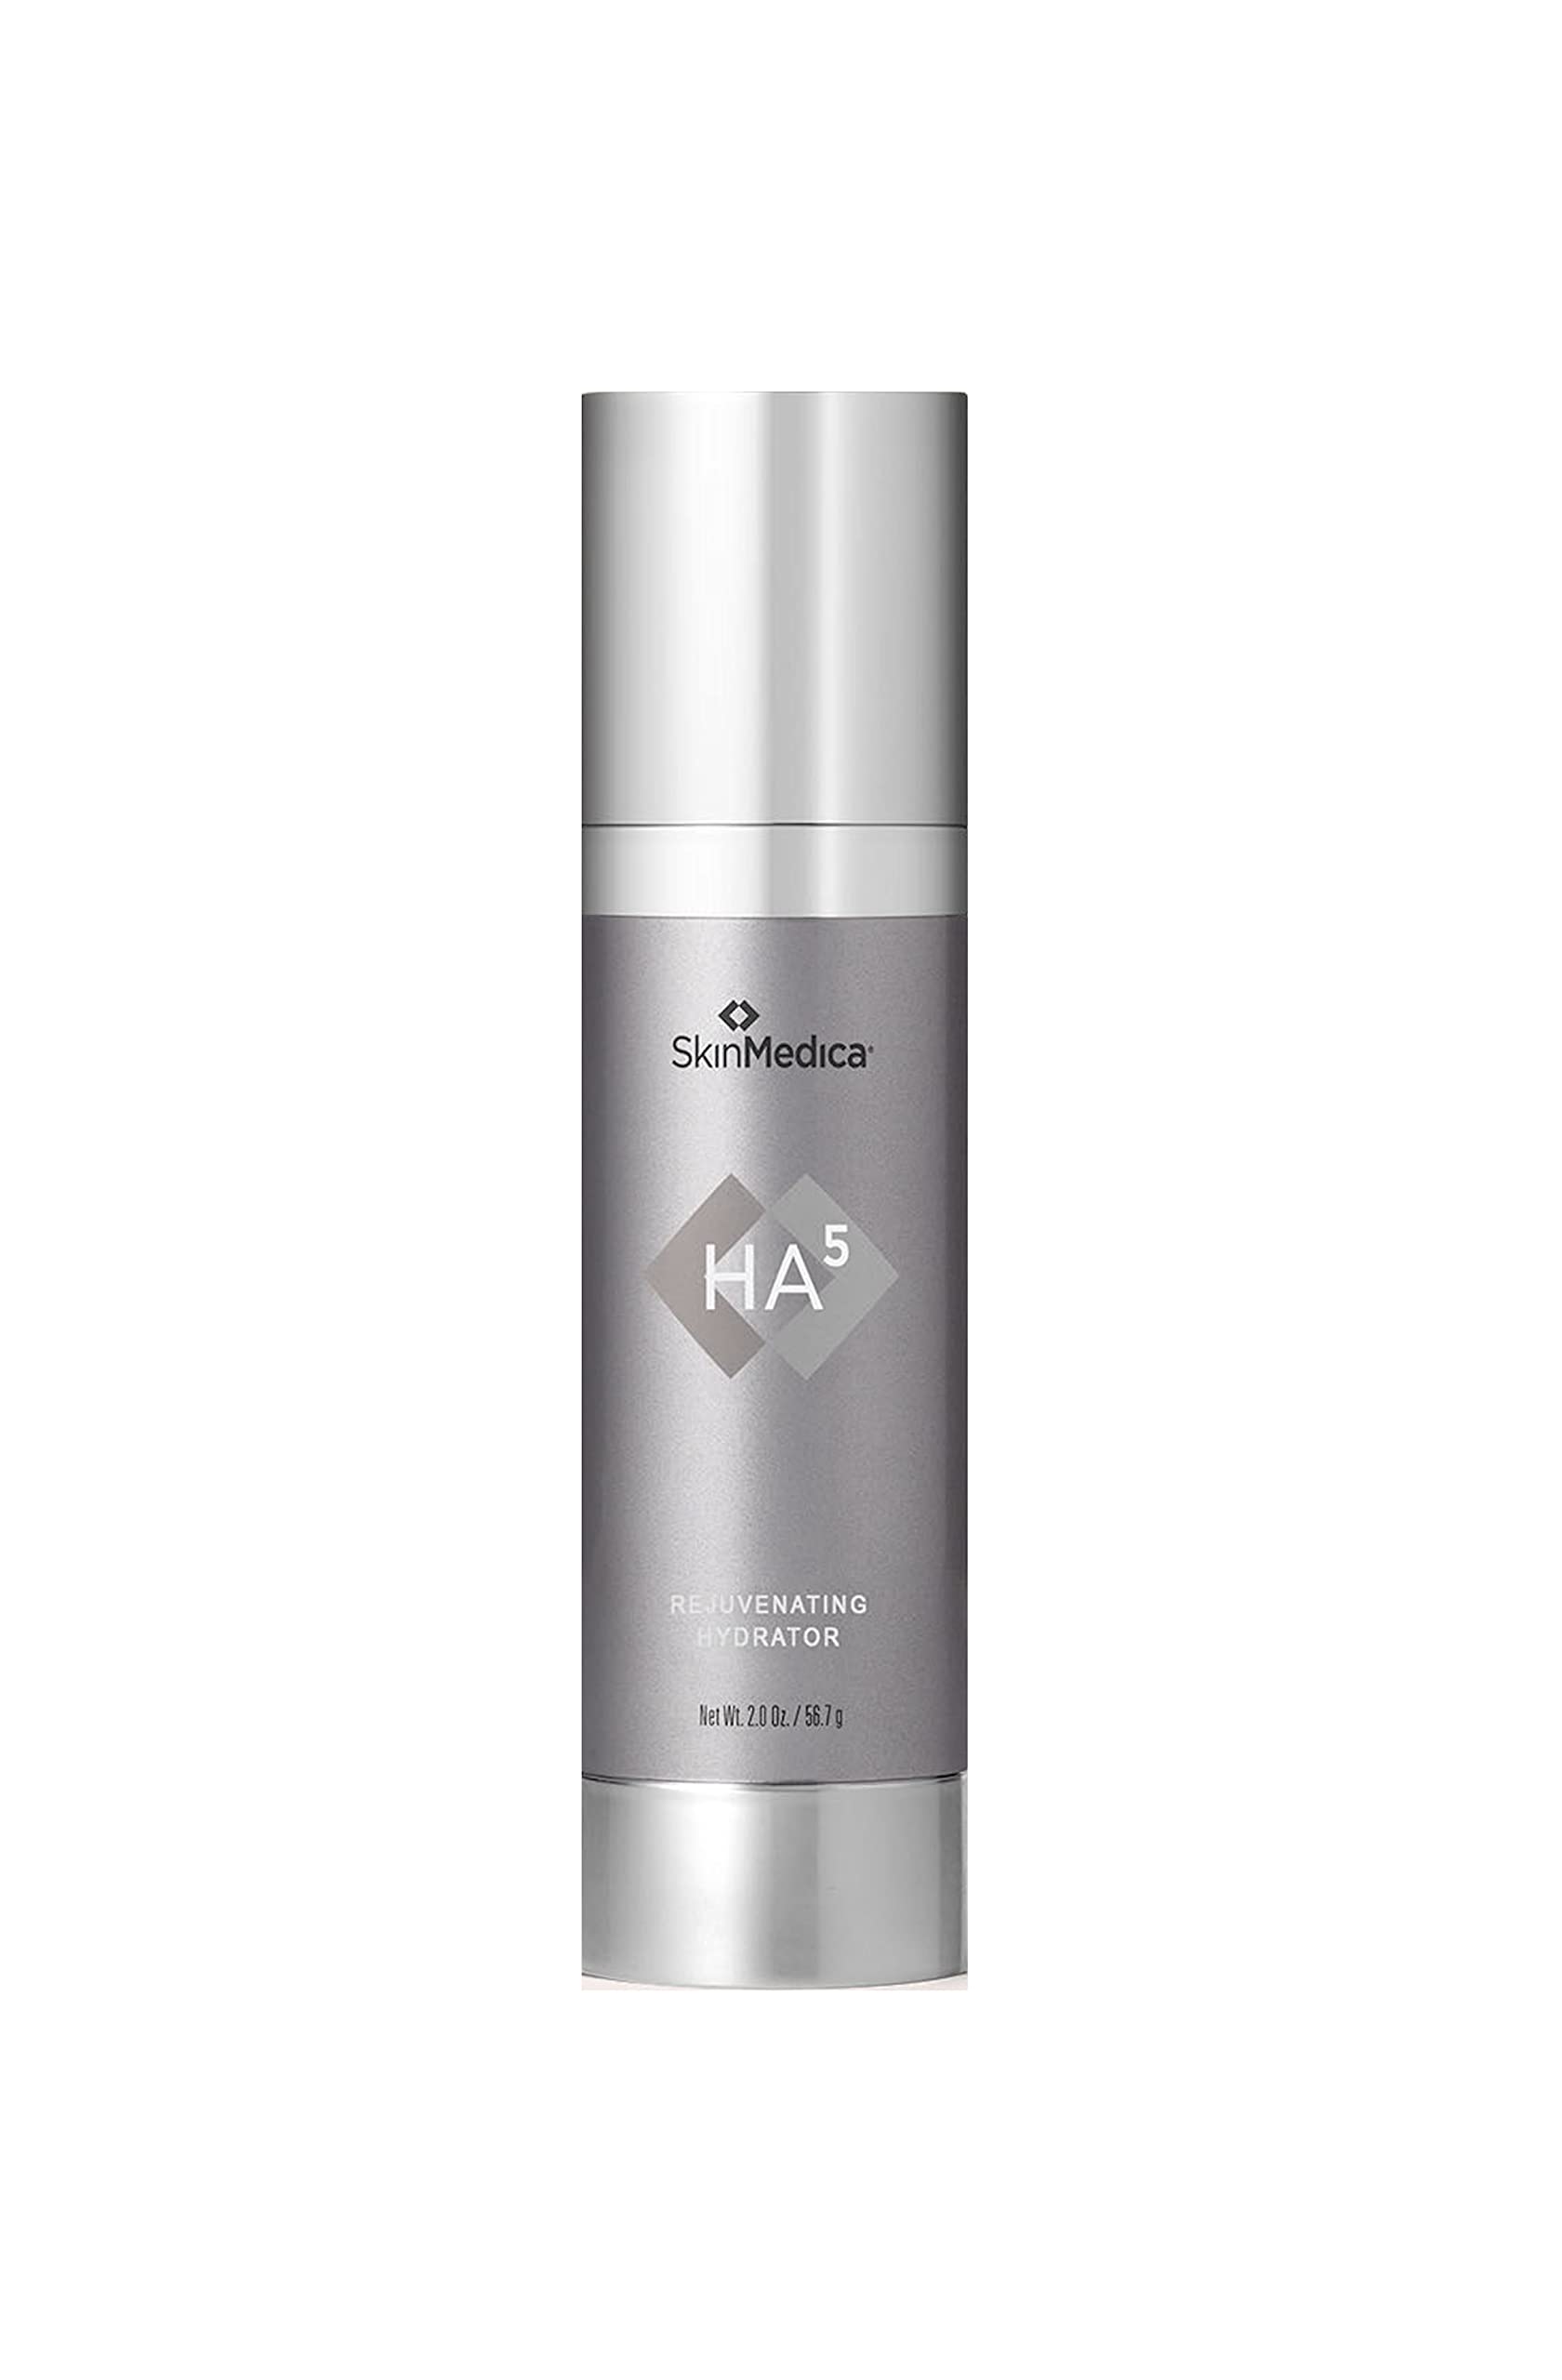 SkinMedica HA5 Rejuvenating Hydrator Hyaluronic Acid Serum for Face with Five Types of Hyaluronic Acid that Smooth Fine Lines and Wrinkles, For All Skin Types, 2 Oz